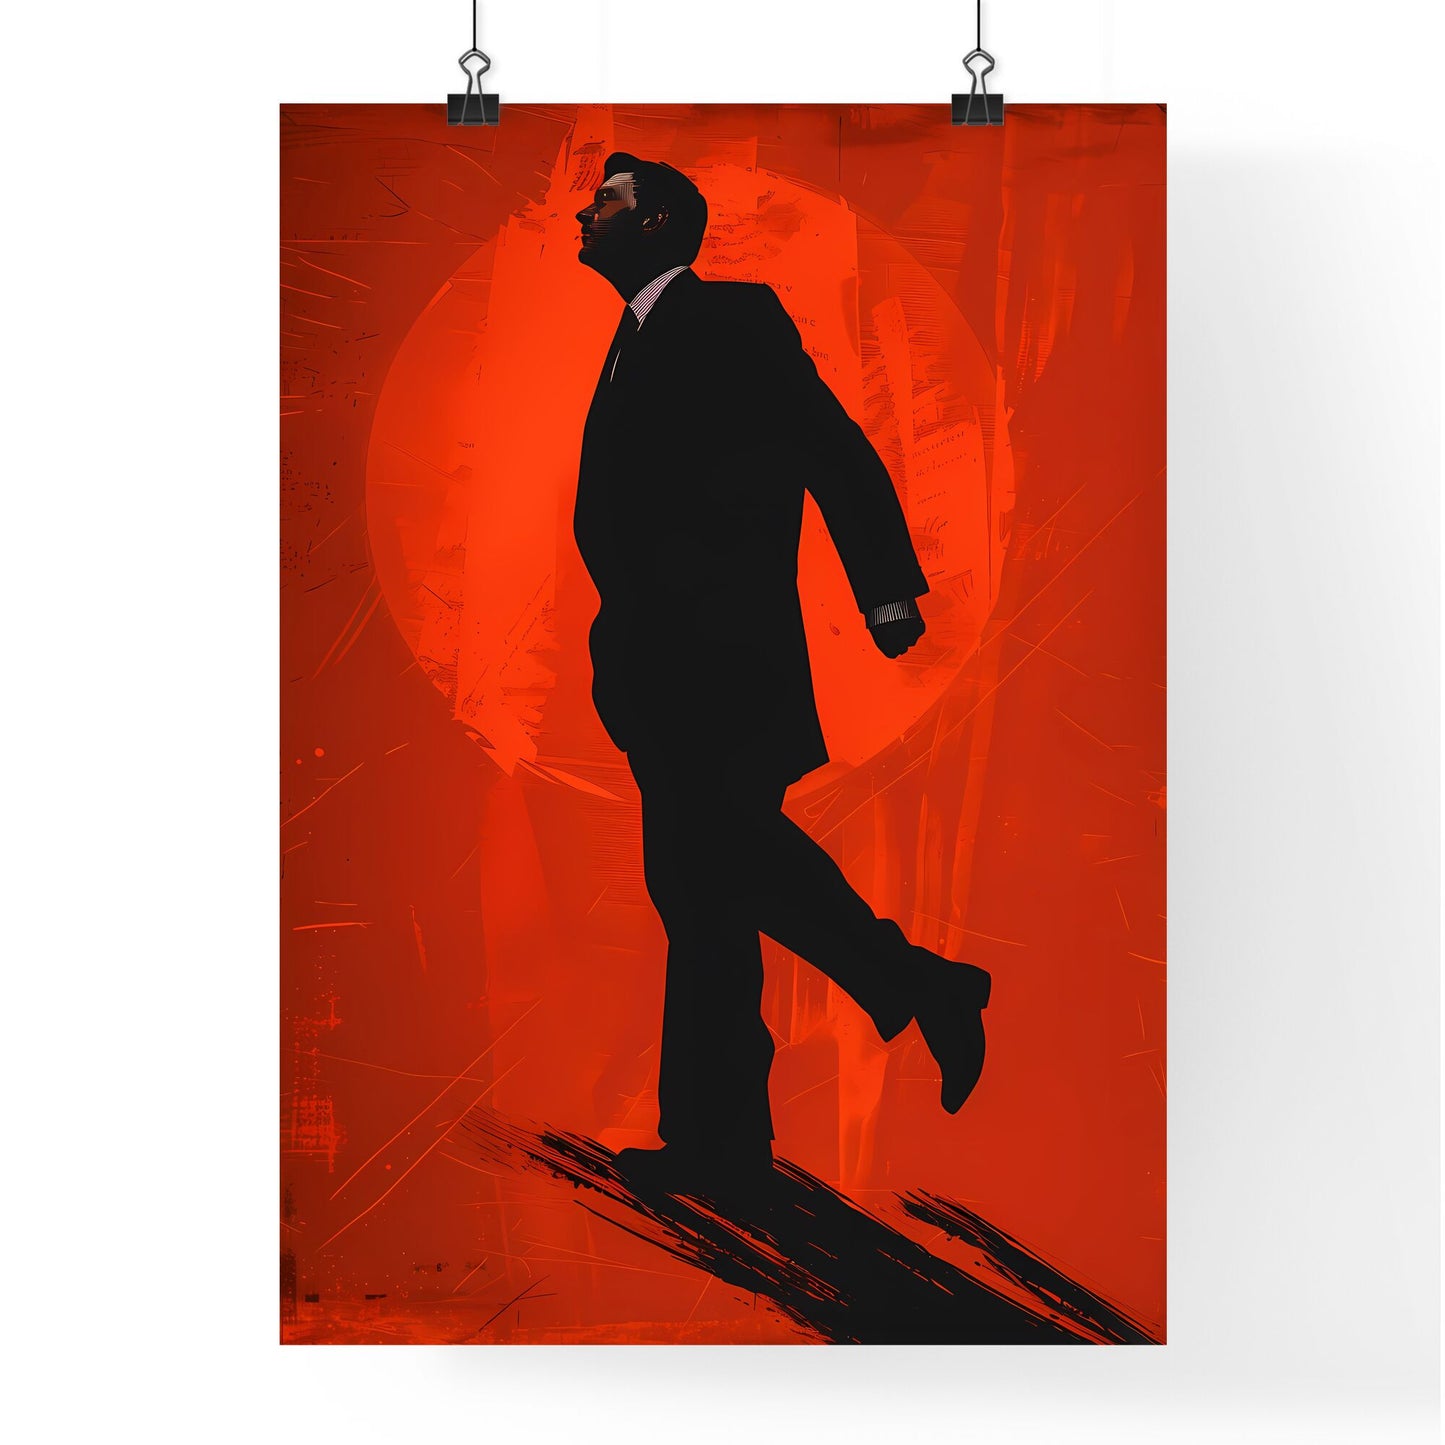 Vibrant, Propaganda-Style Painting of a Suited Man Walking - Art, Abstract, Surrealism, Digital Art Default Title